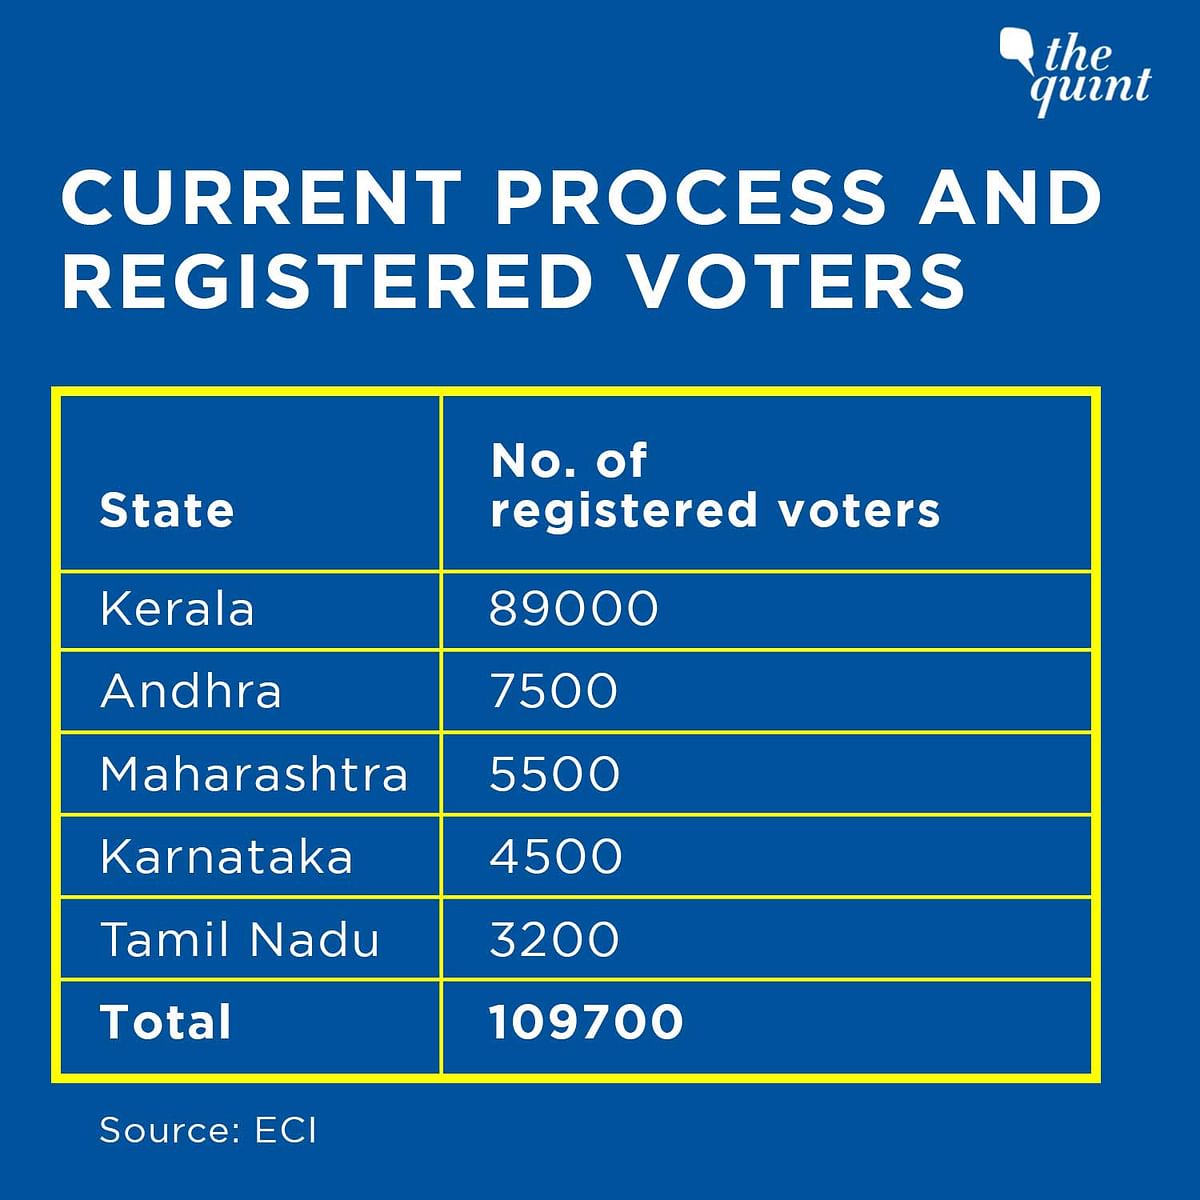 Here’s how around 1 crore eligible NRI voters could tilt the scales in a closely contested election.